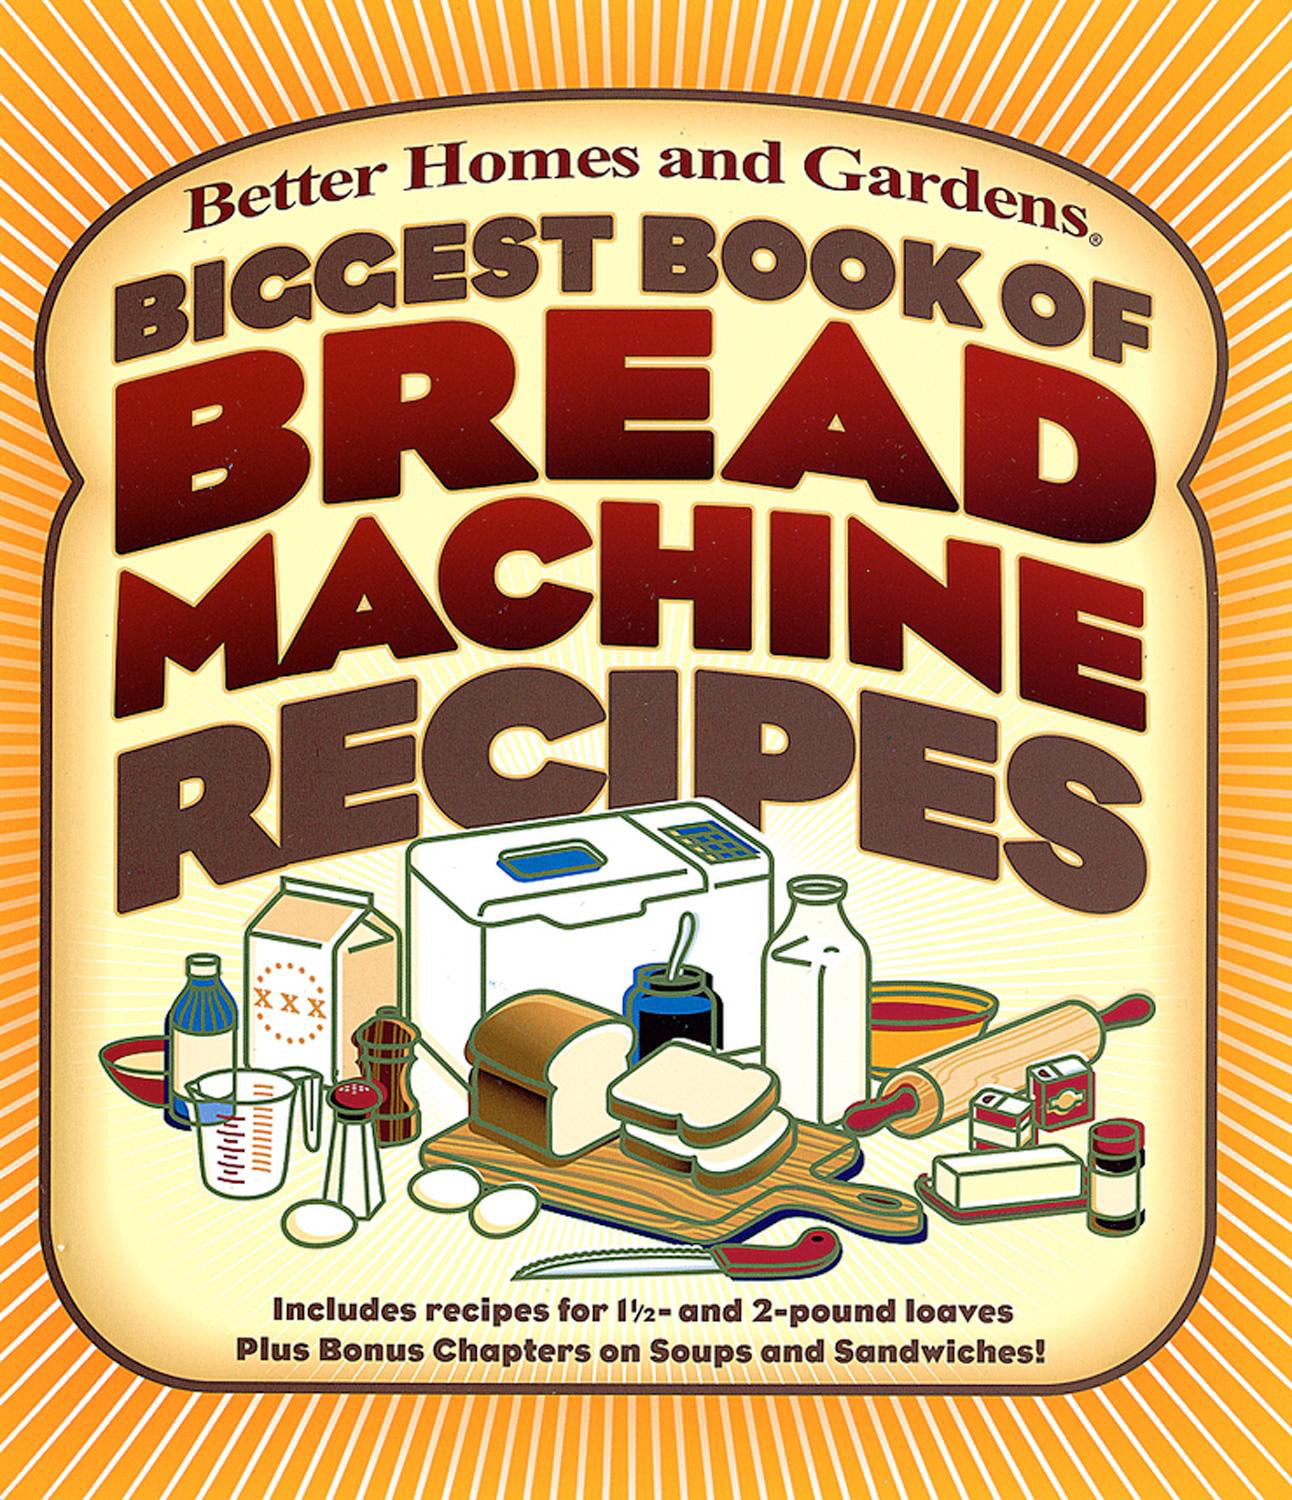 Better Homes and Gardens Cooking: Biggest Book of Bread Machine Recipes (Ot...